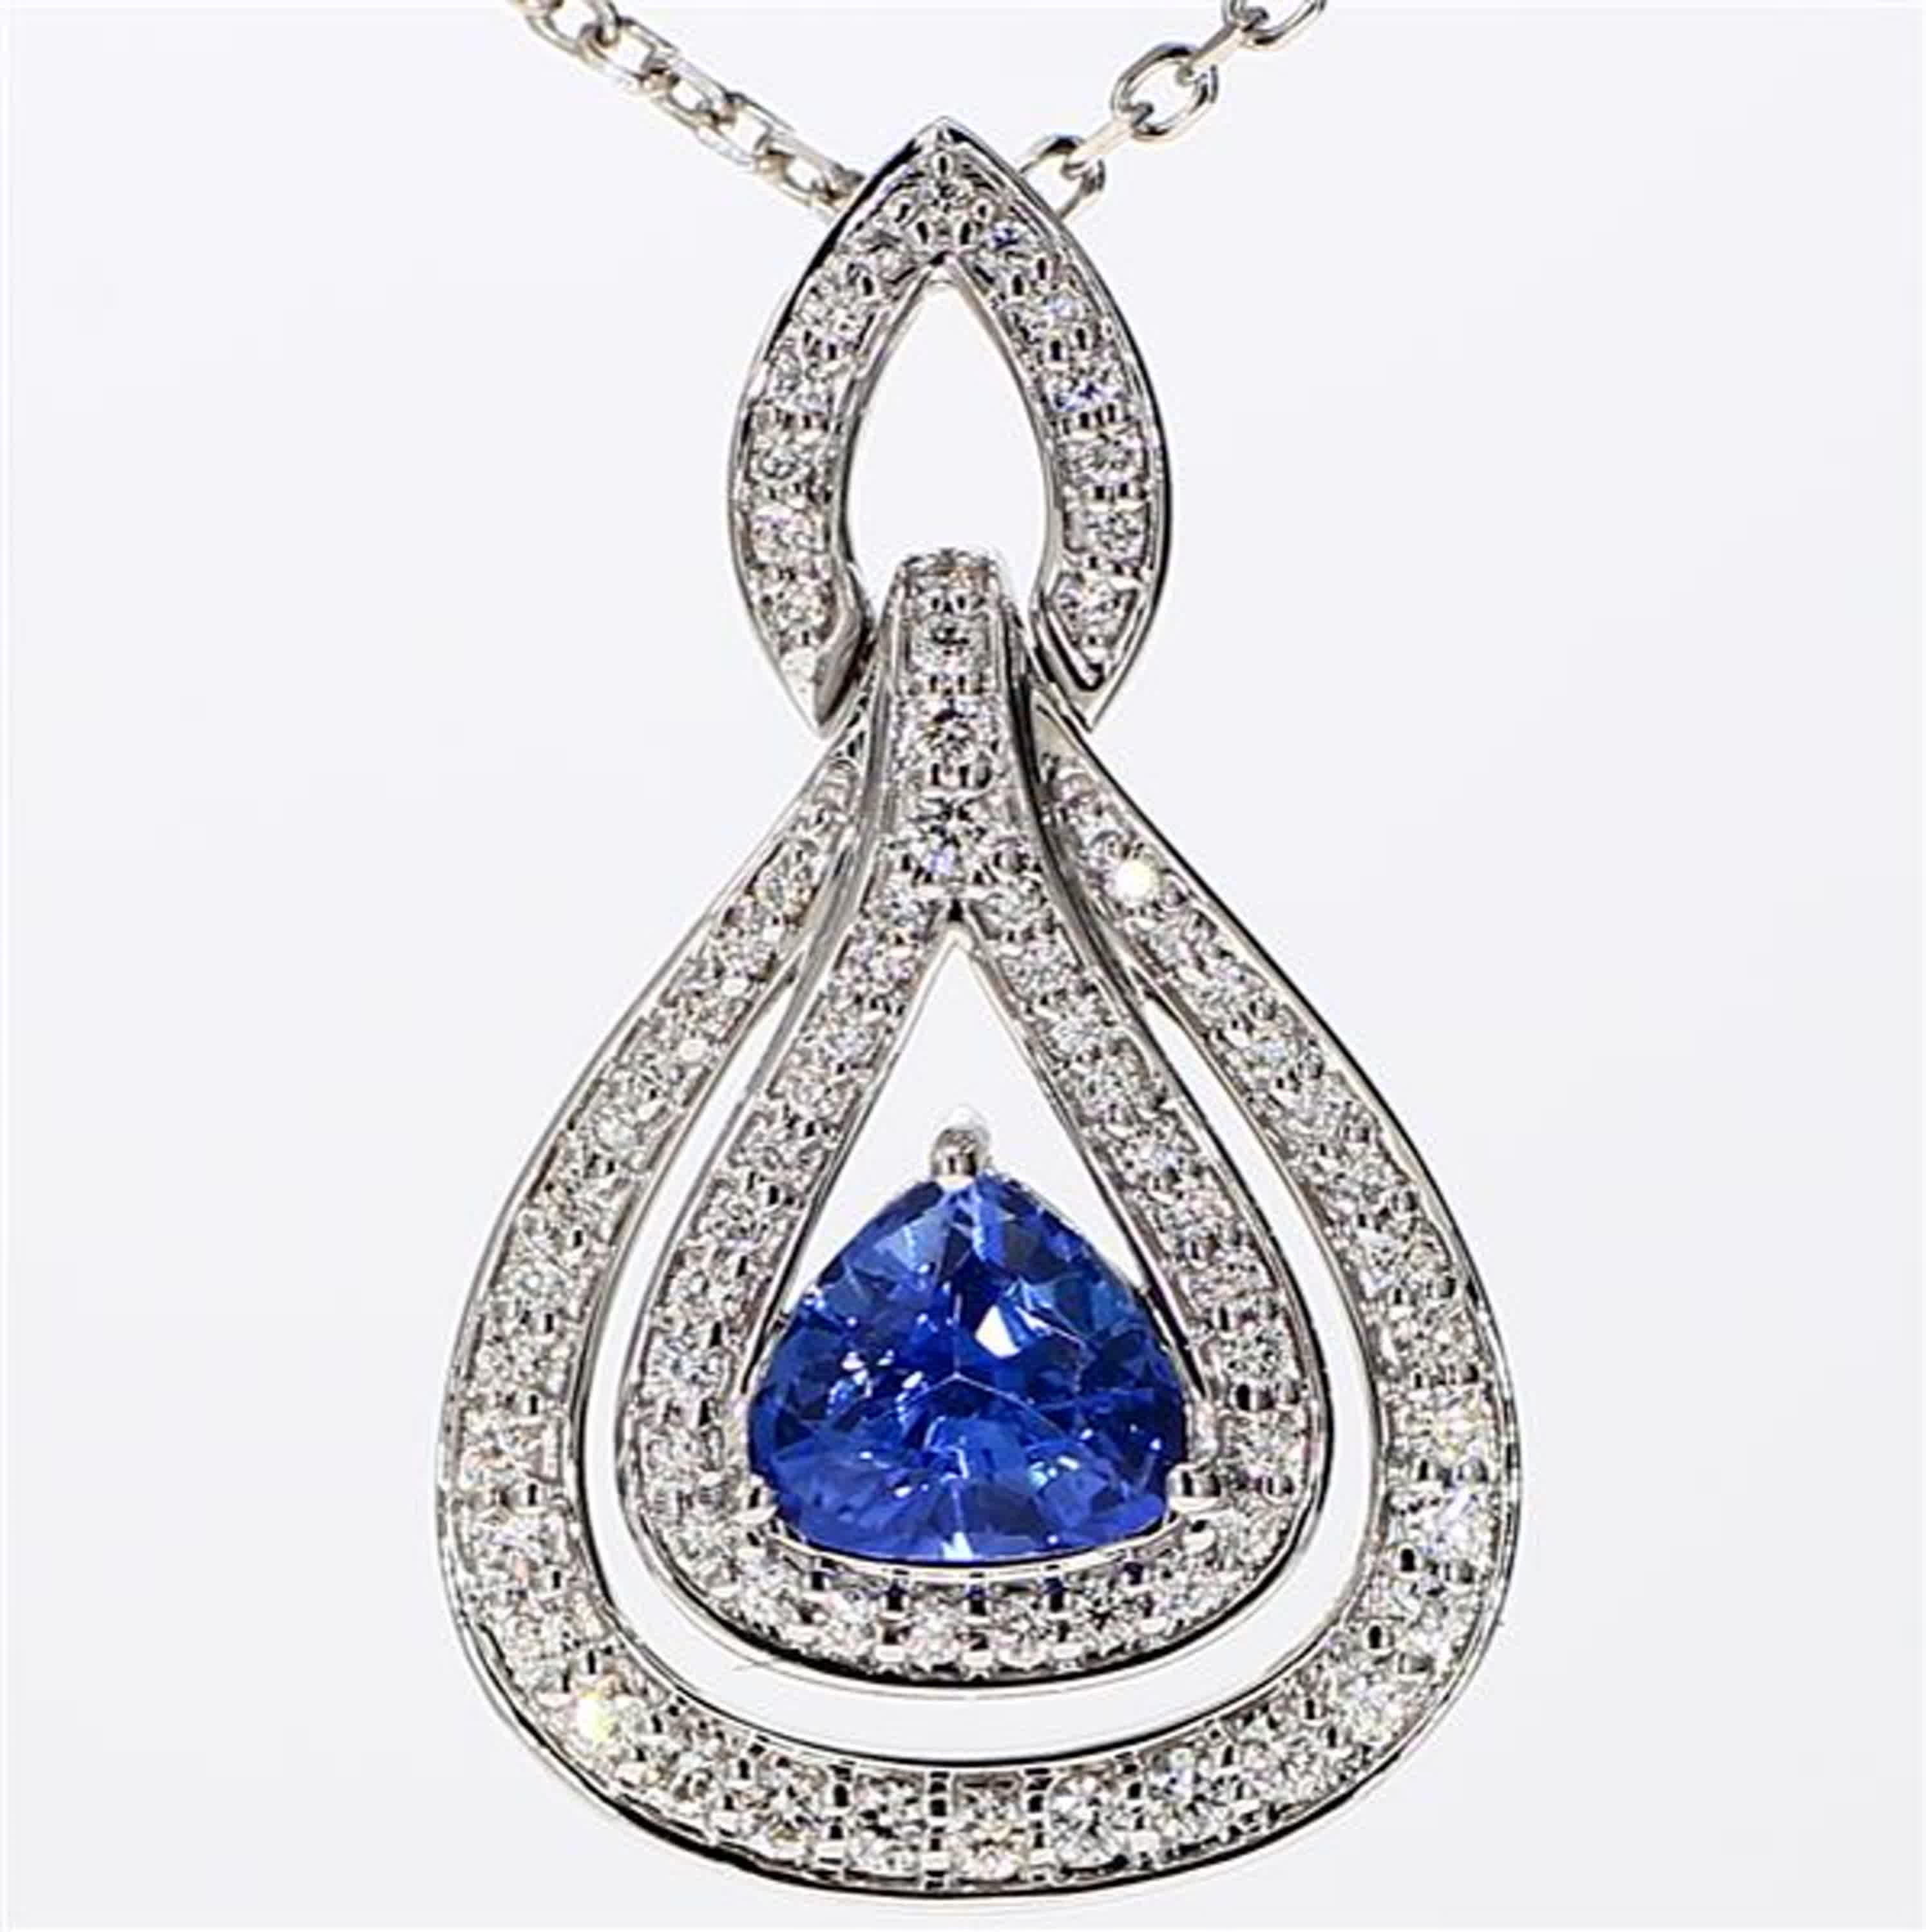 RareGemWorld's classic sapphire pendant. Mounted in a beautiful 18K White Gold setting with a natural trilliant cut blue sapphire. The sapphire is surrounded by natural round white diamond melee. This pendant is guaranteed to impress and enhance